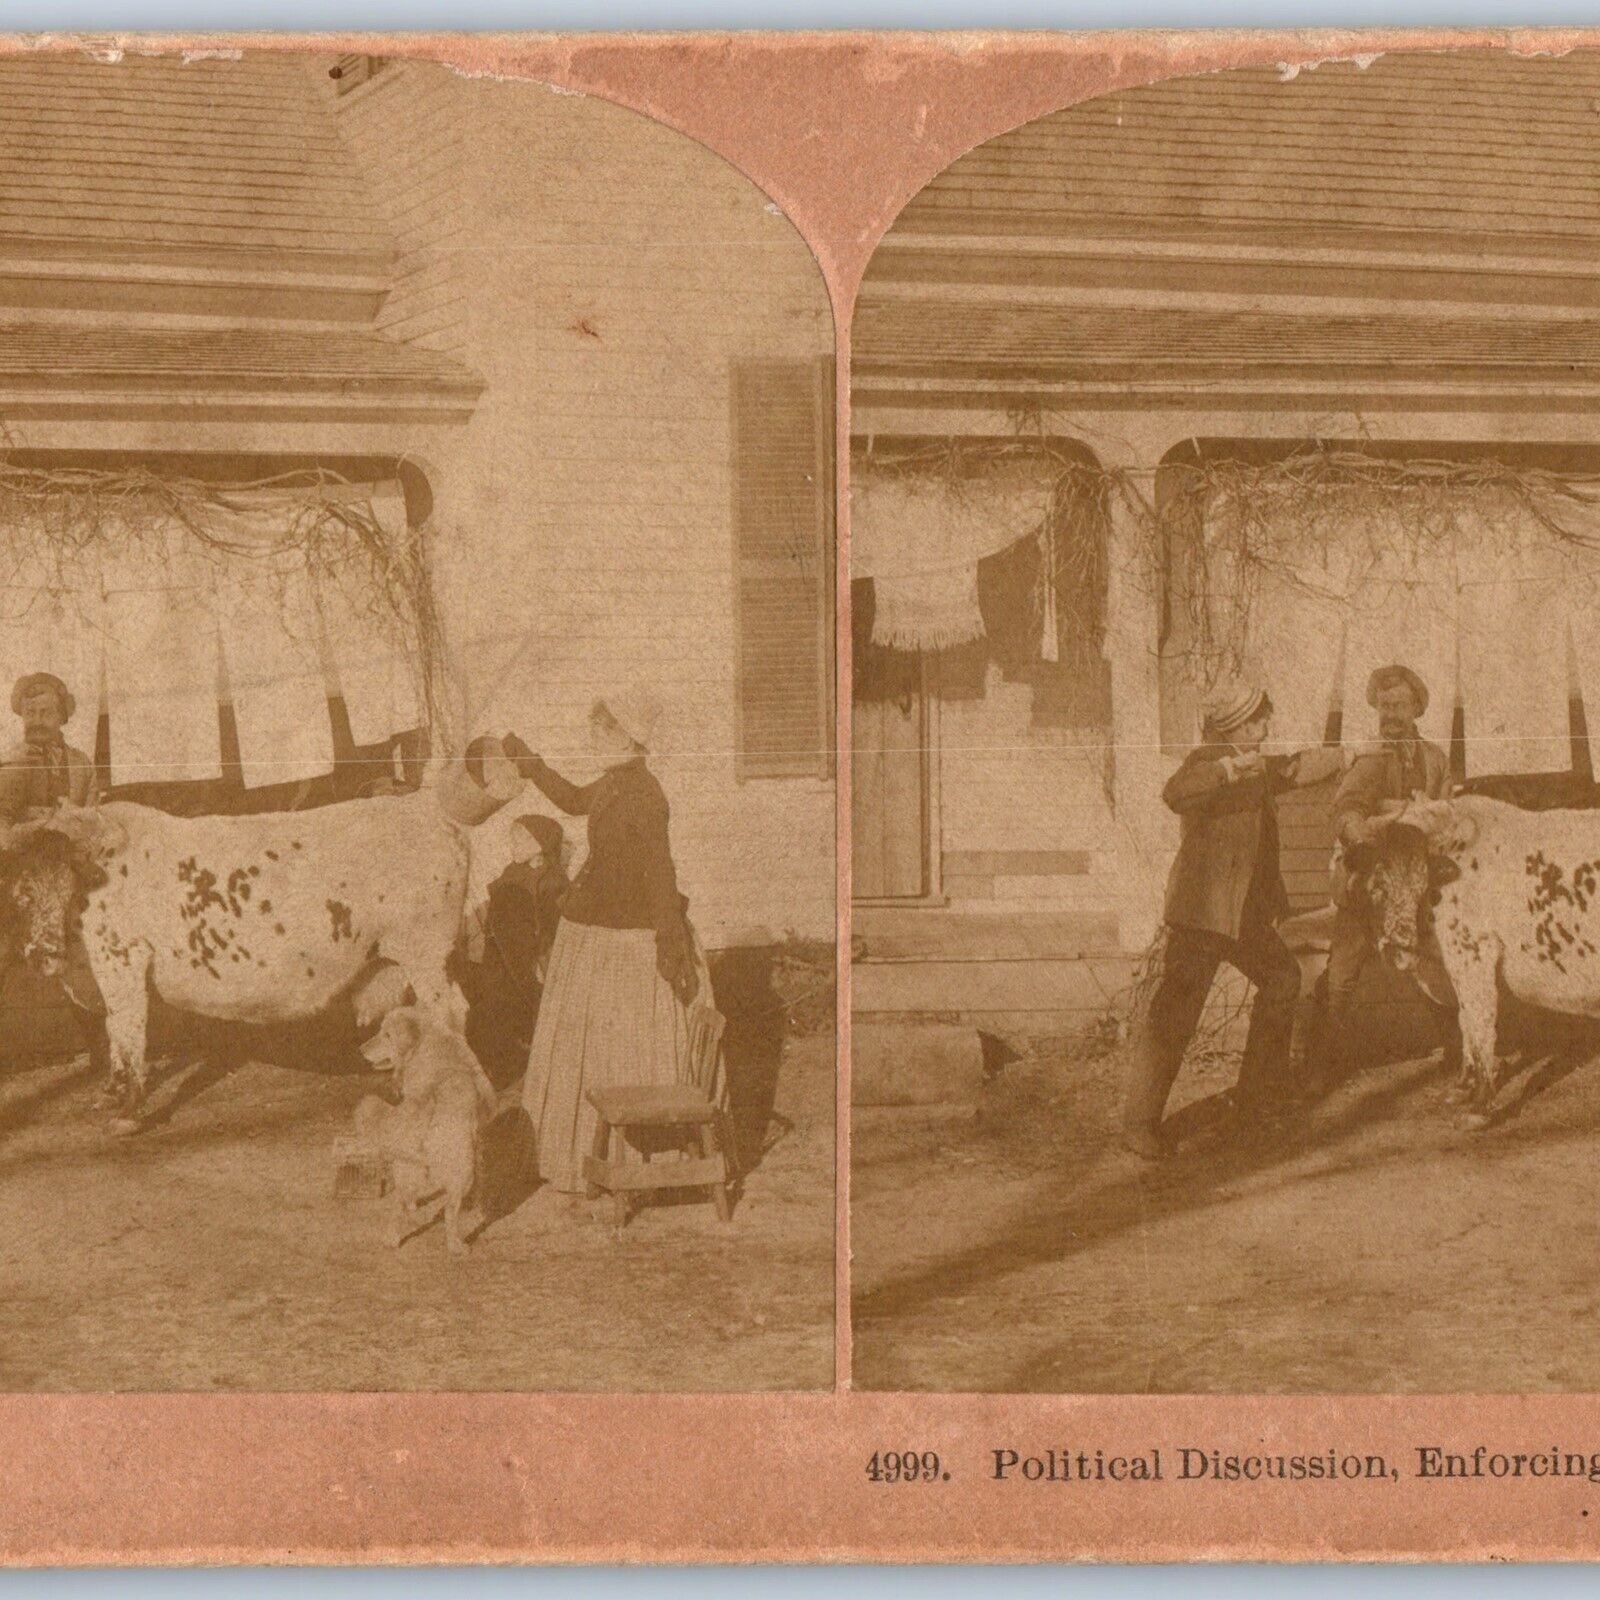 1889 Family House Fight on Cow Dog Political Discussion Stereo Photo Kilburn V24